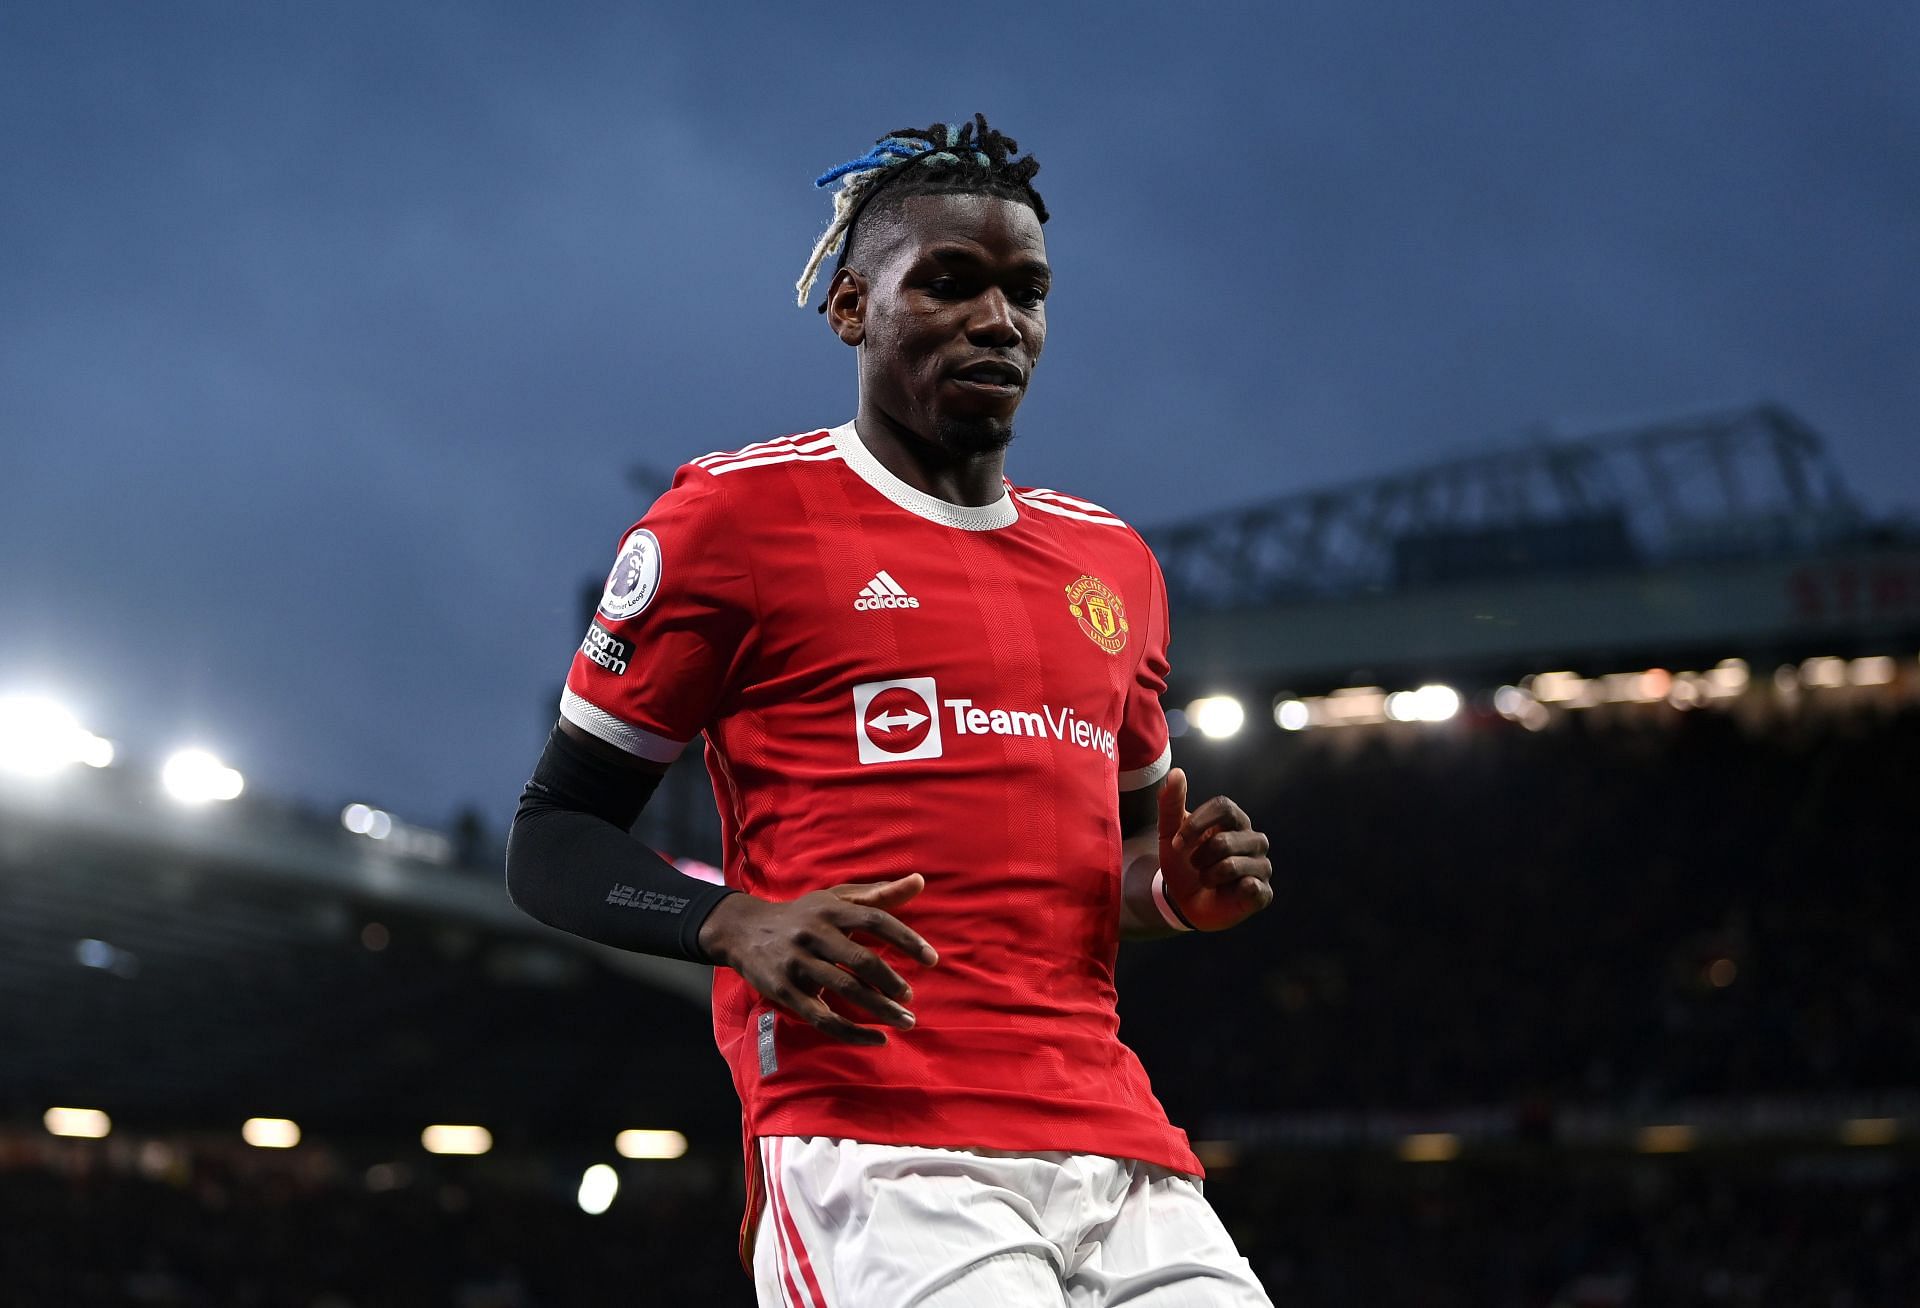 PSG have made Pogba their primary target this summer.